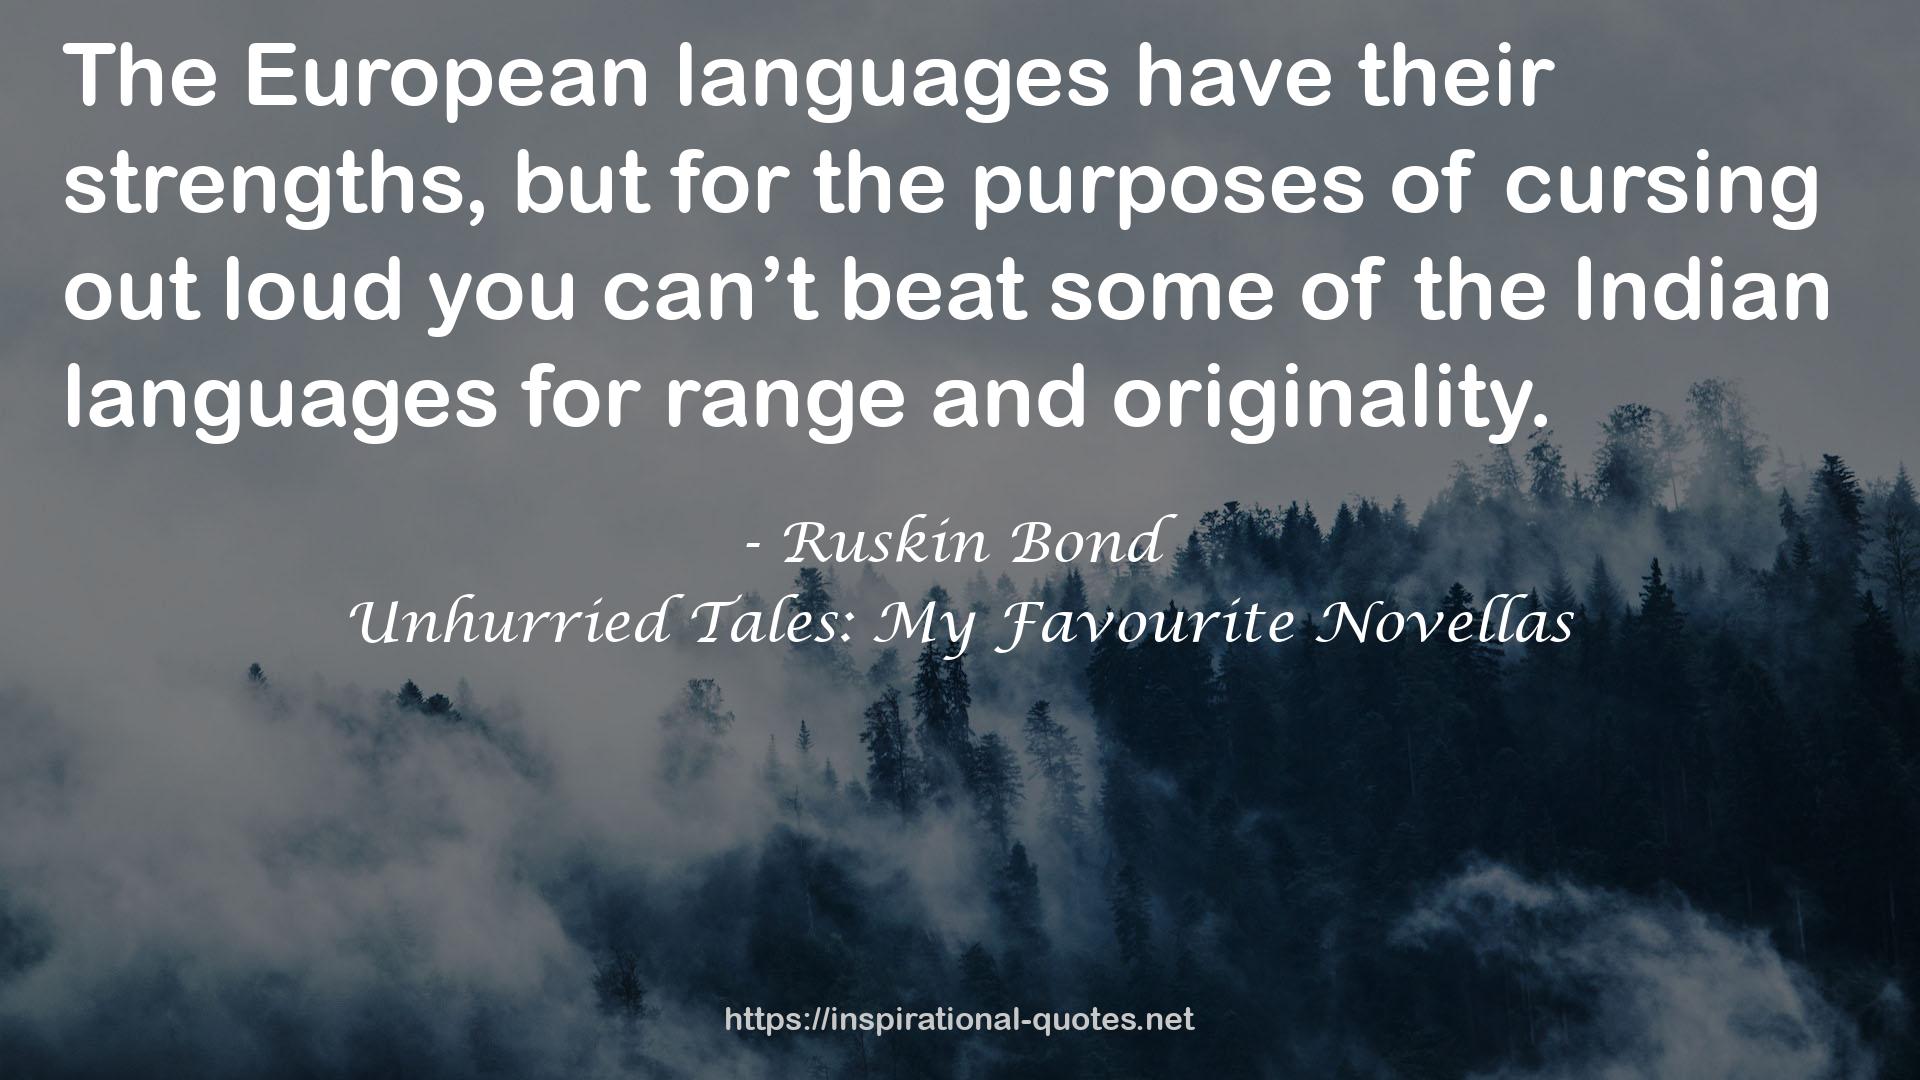 Unhurried Tales: My Favourite Novellas QUOTES